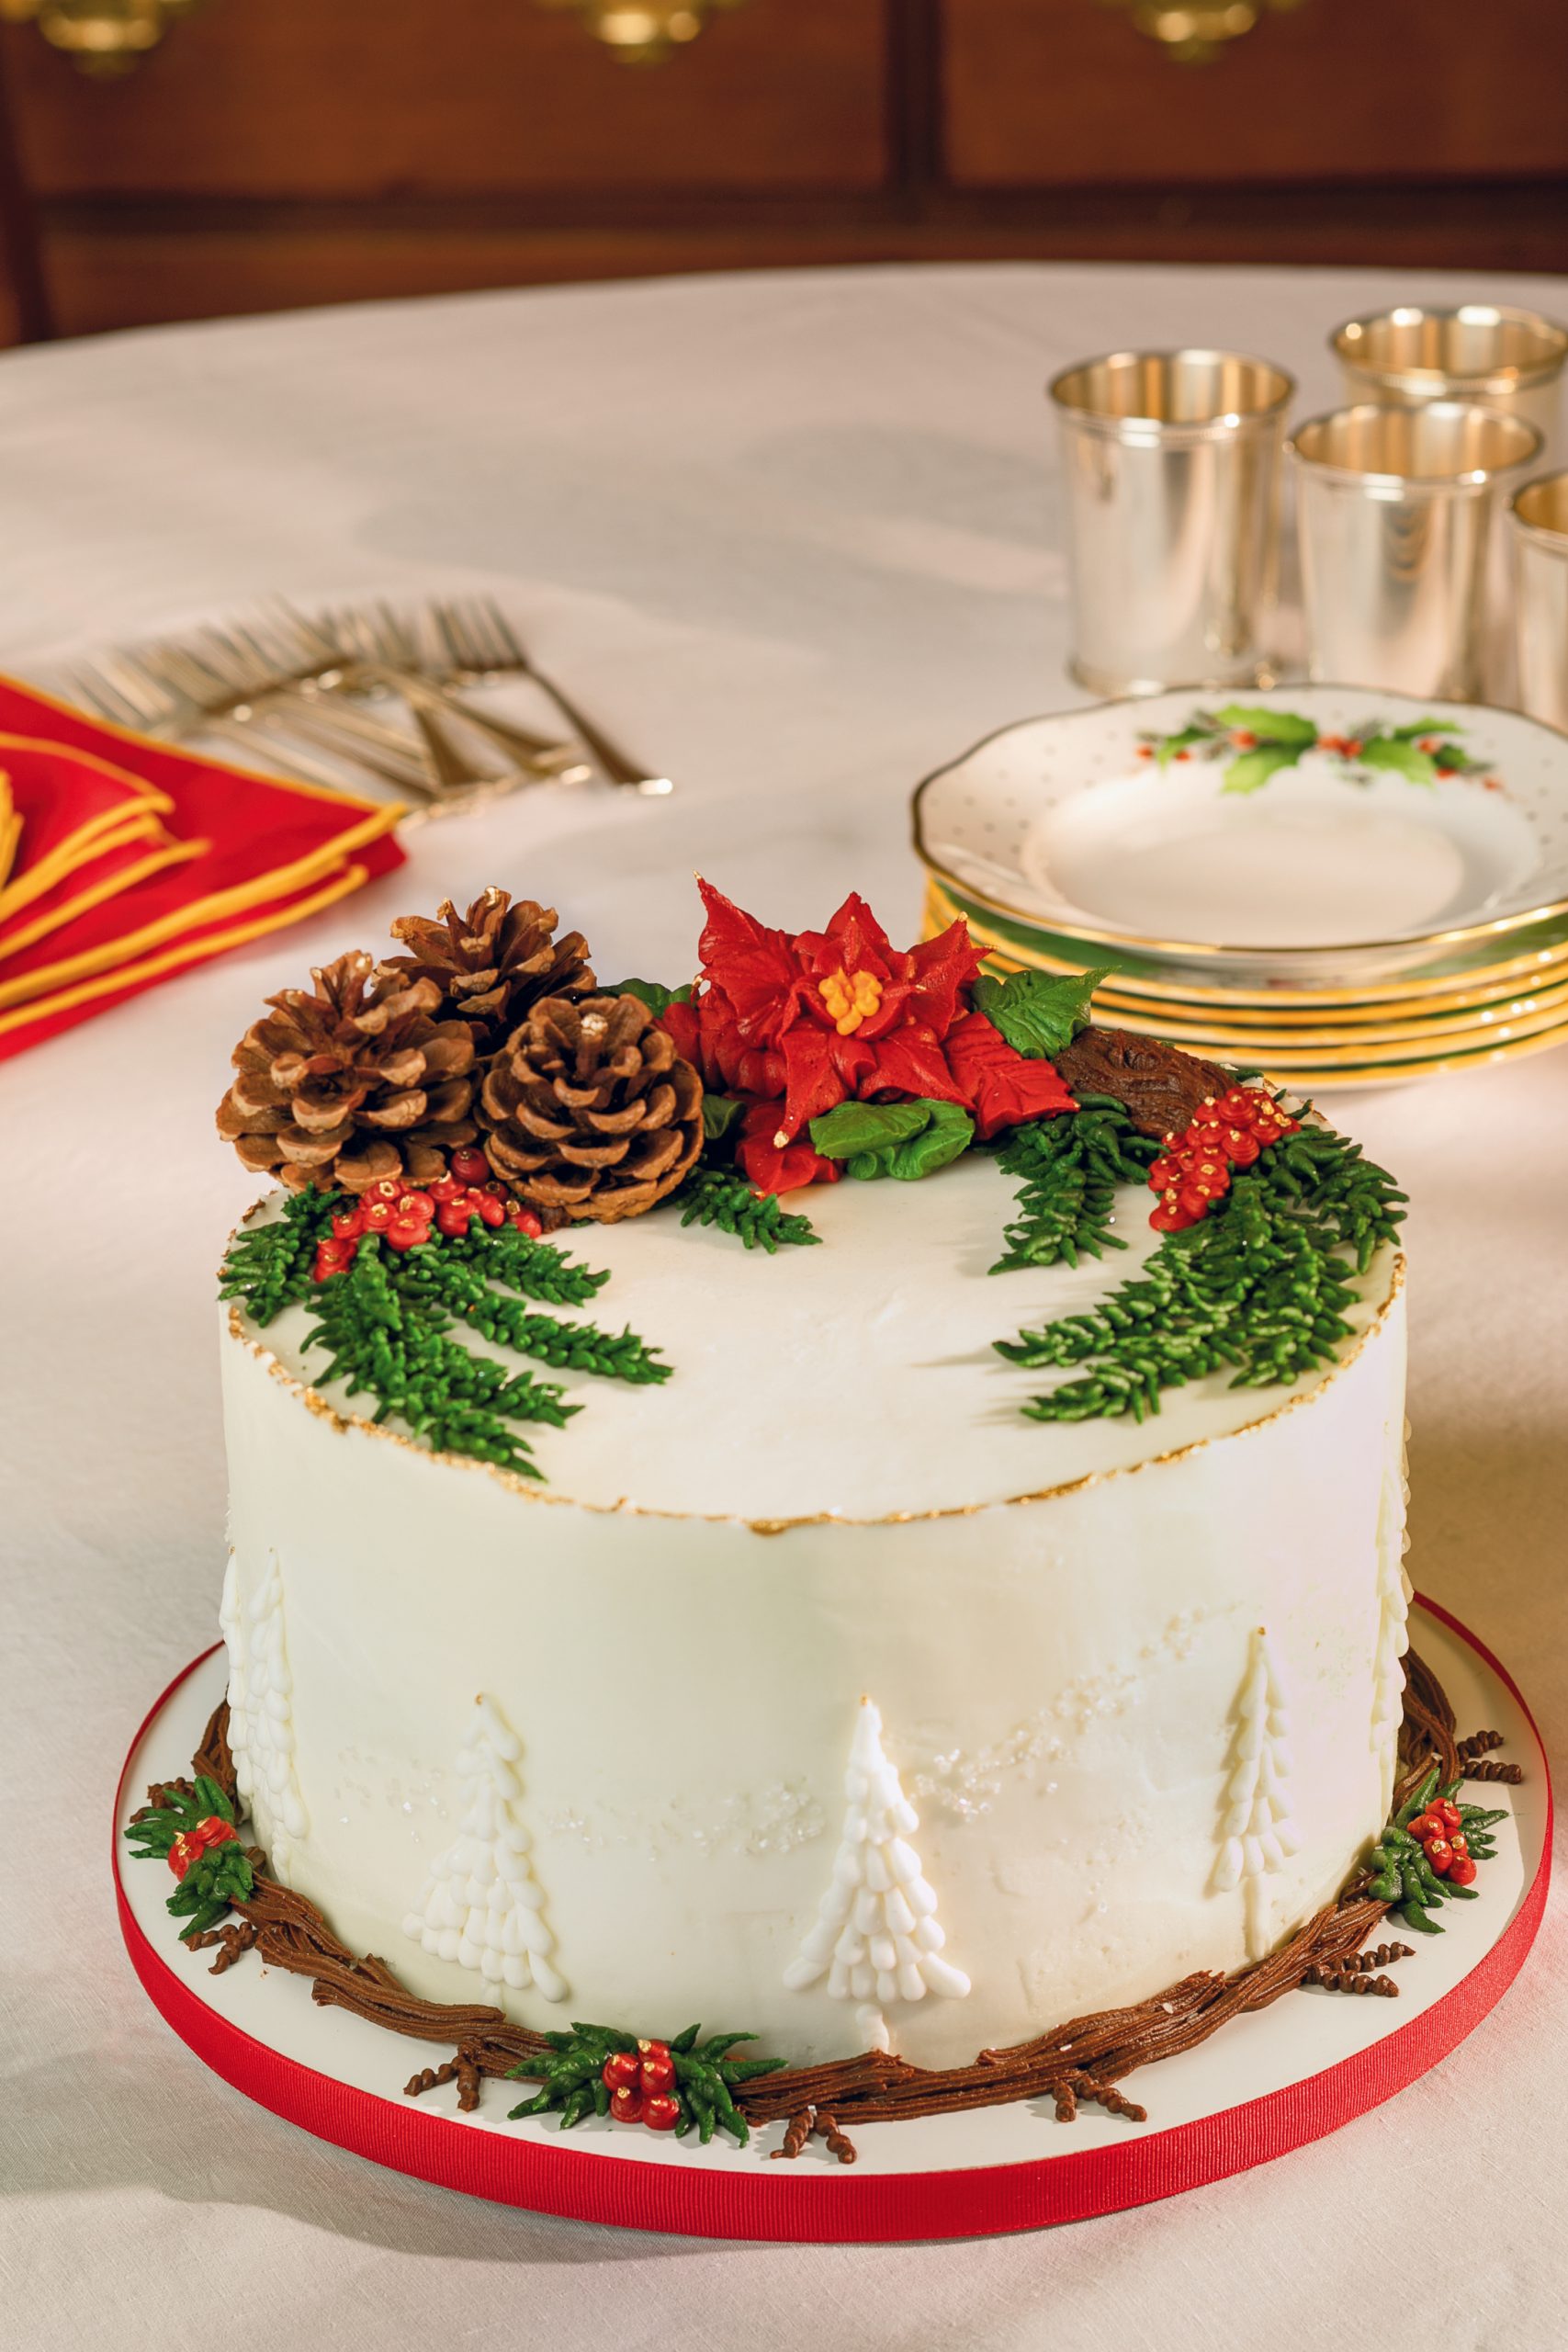 Bonnie Brunt Cakes’ sensational red velvet cake is festive on Herend Noel dessert plate with Carole Shiber Designs red and gold napkins, courtesy 
of non(e)such.